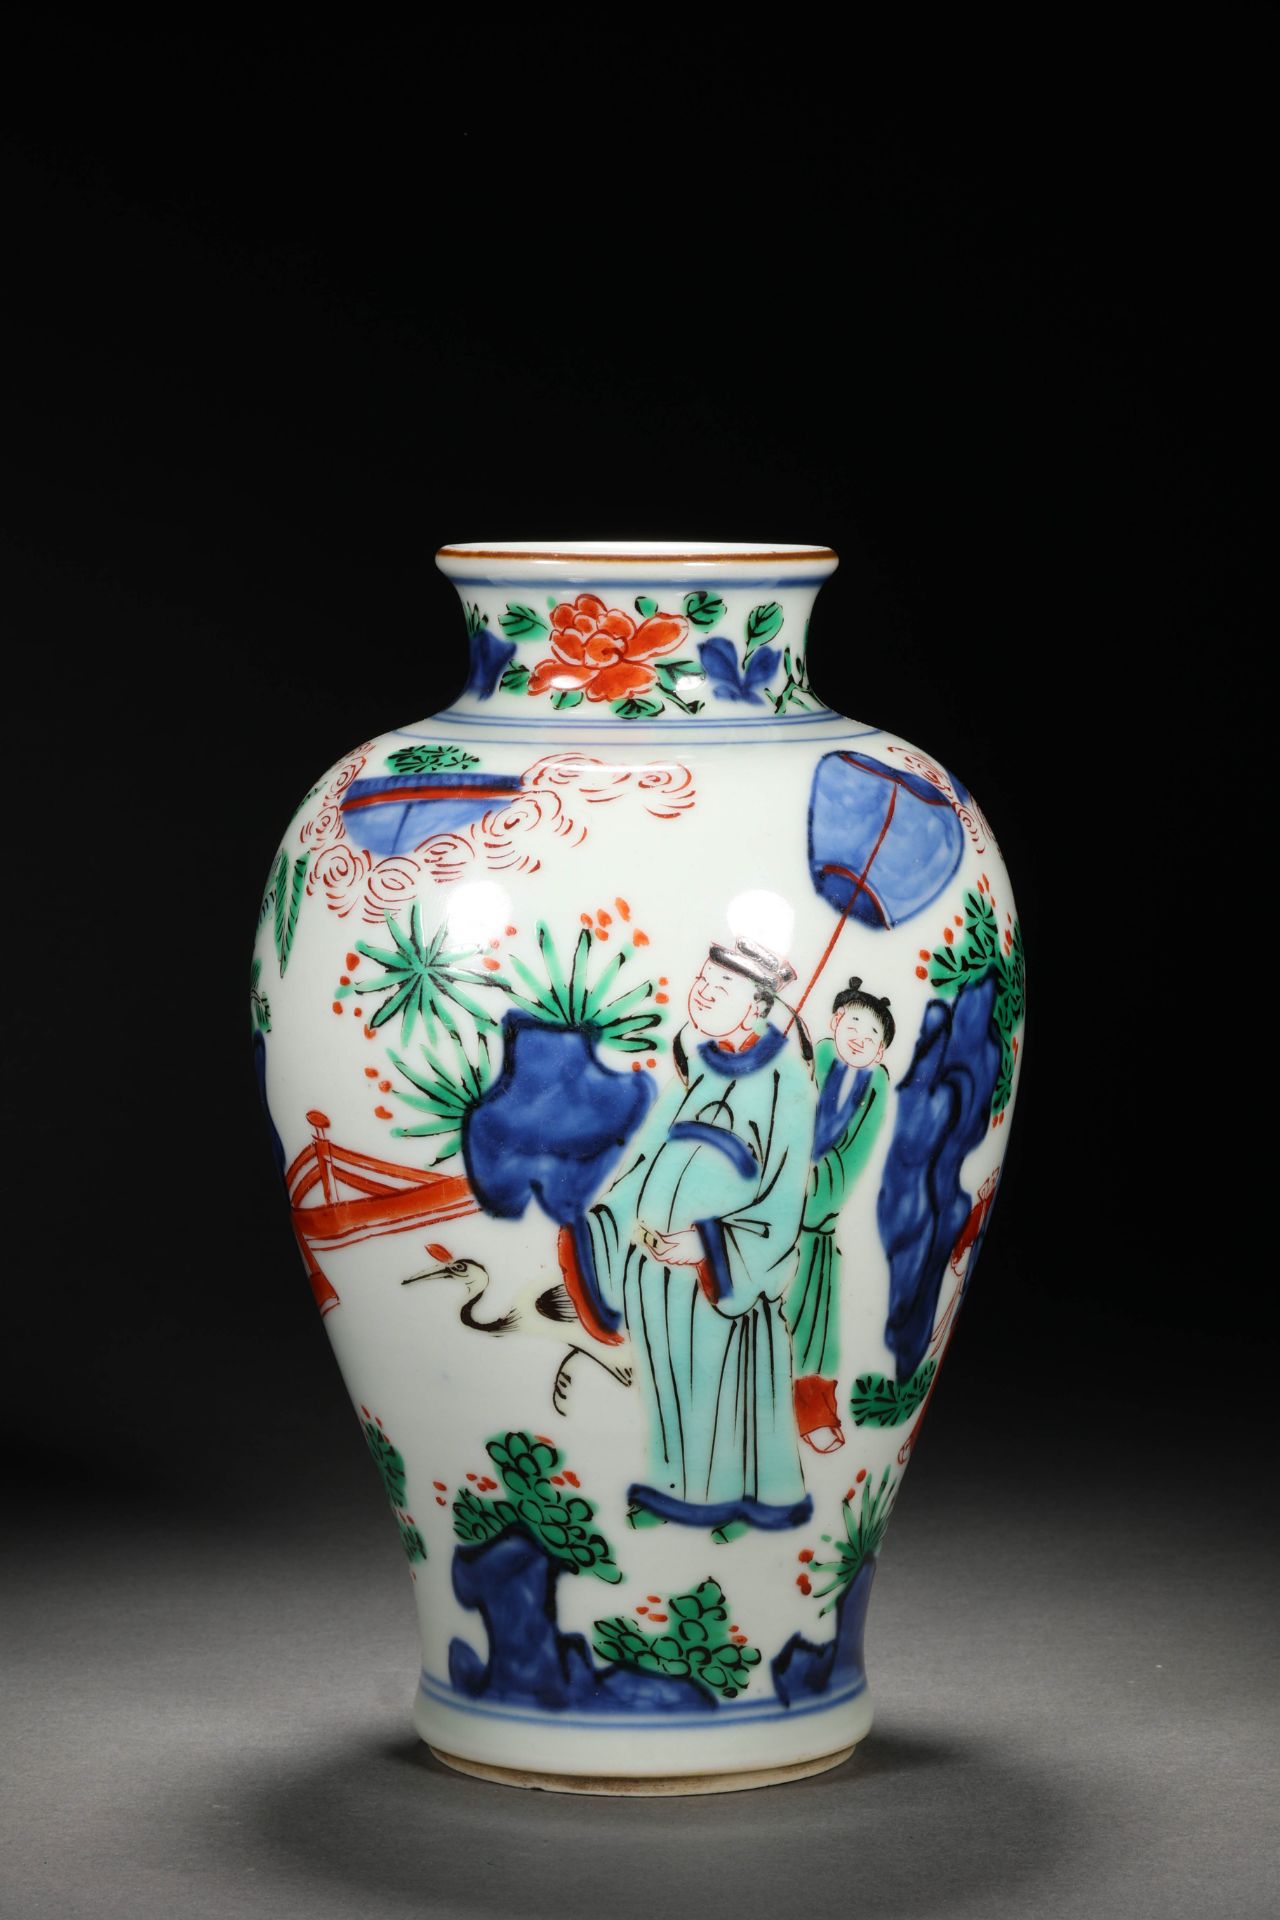 Qing dynasty multicolored carved figure bottle - Image 2 of 10